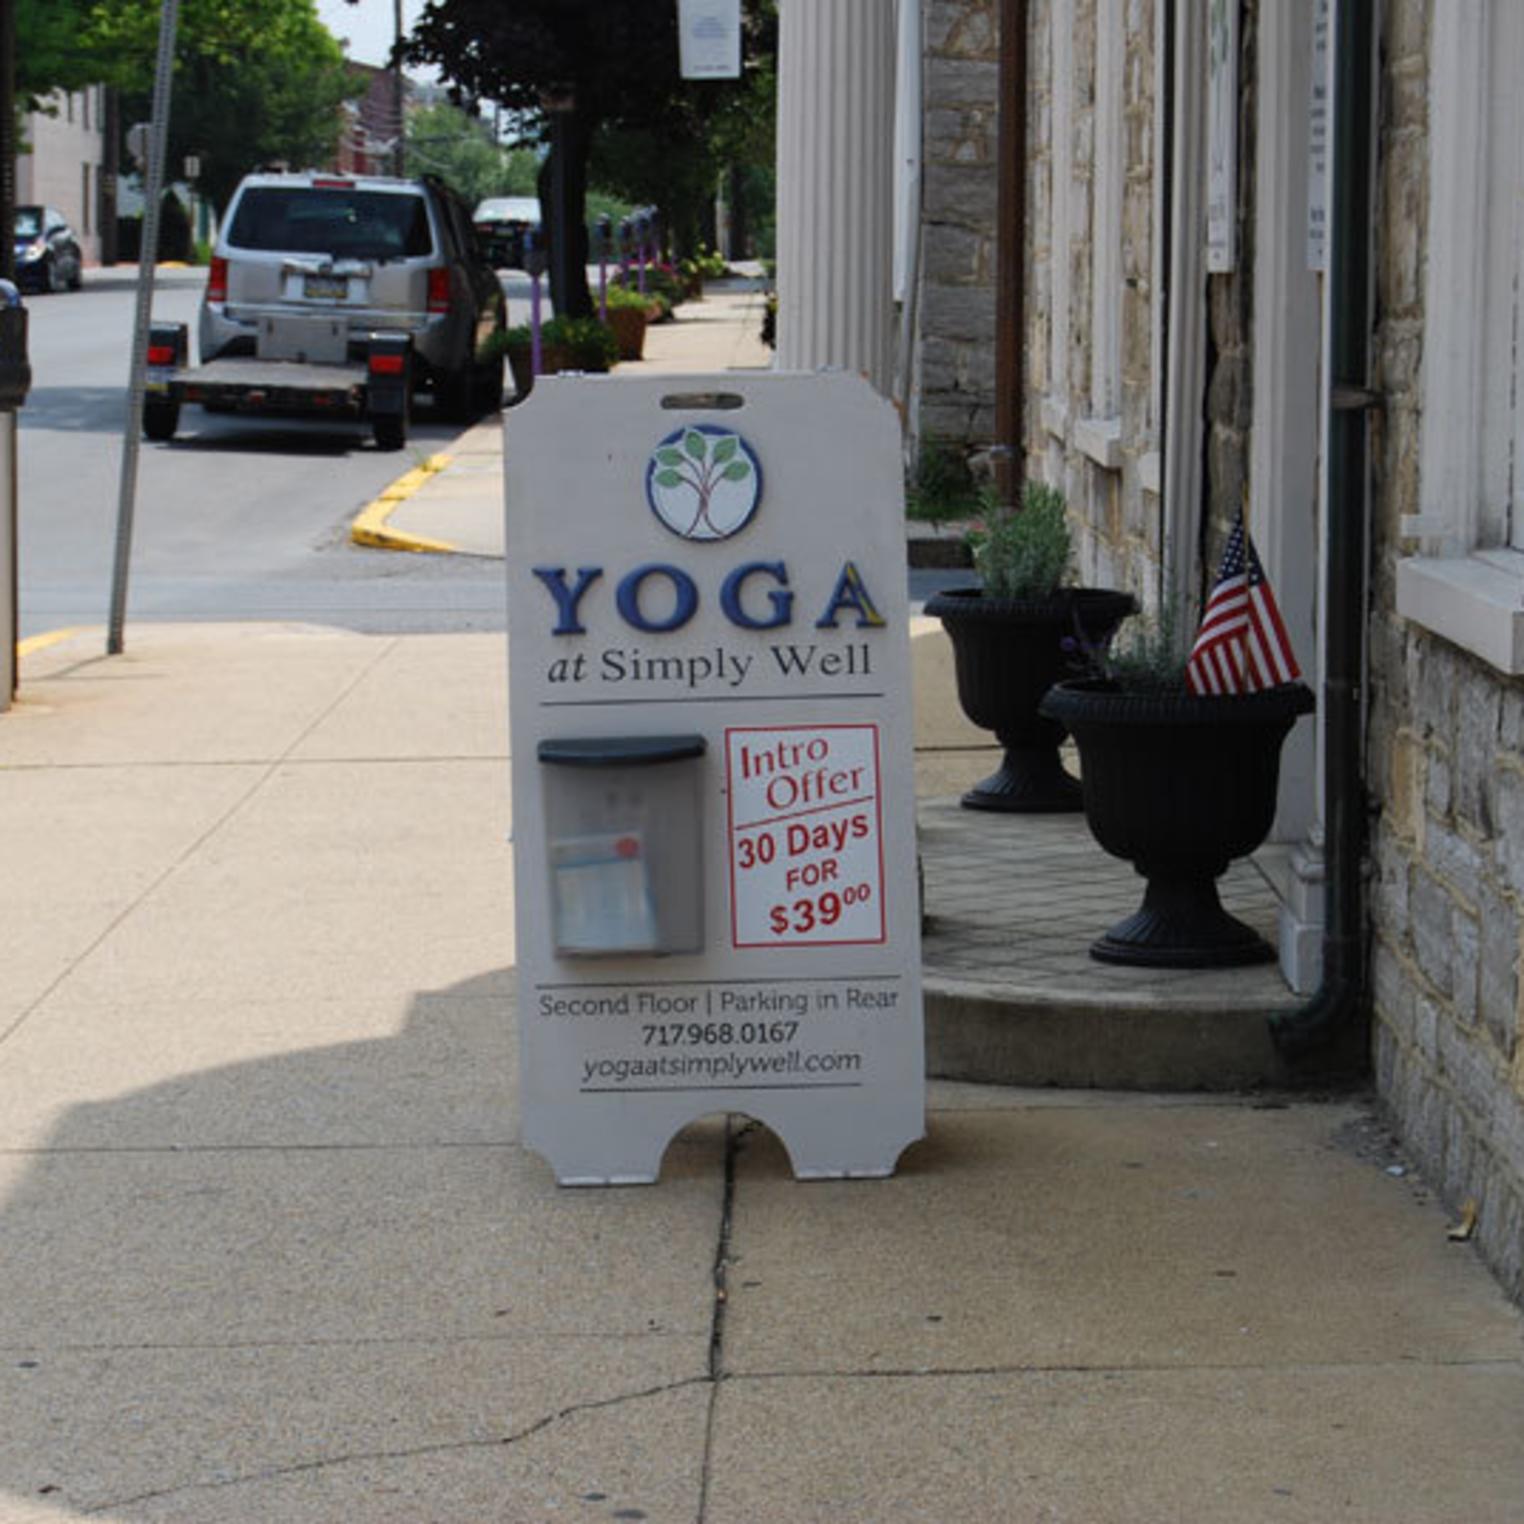 Yoga at Simply Well